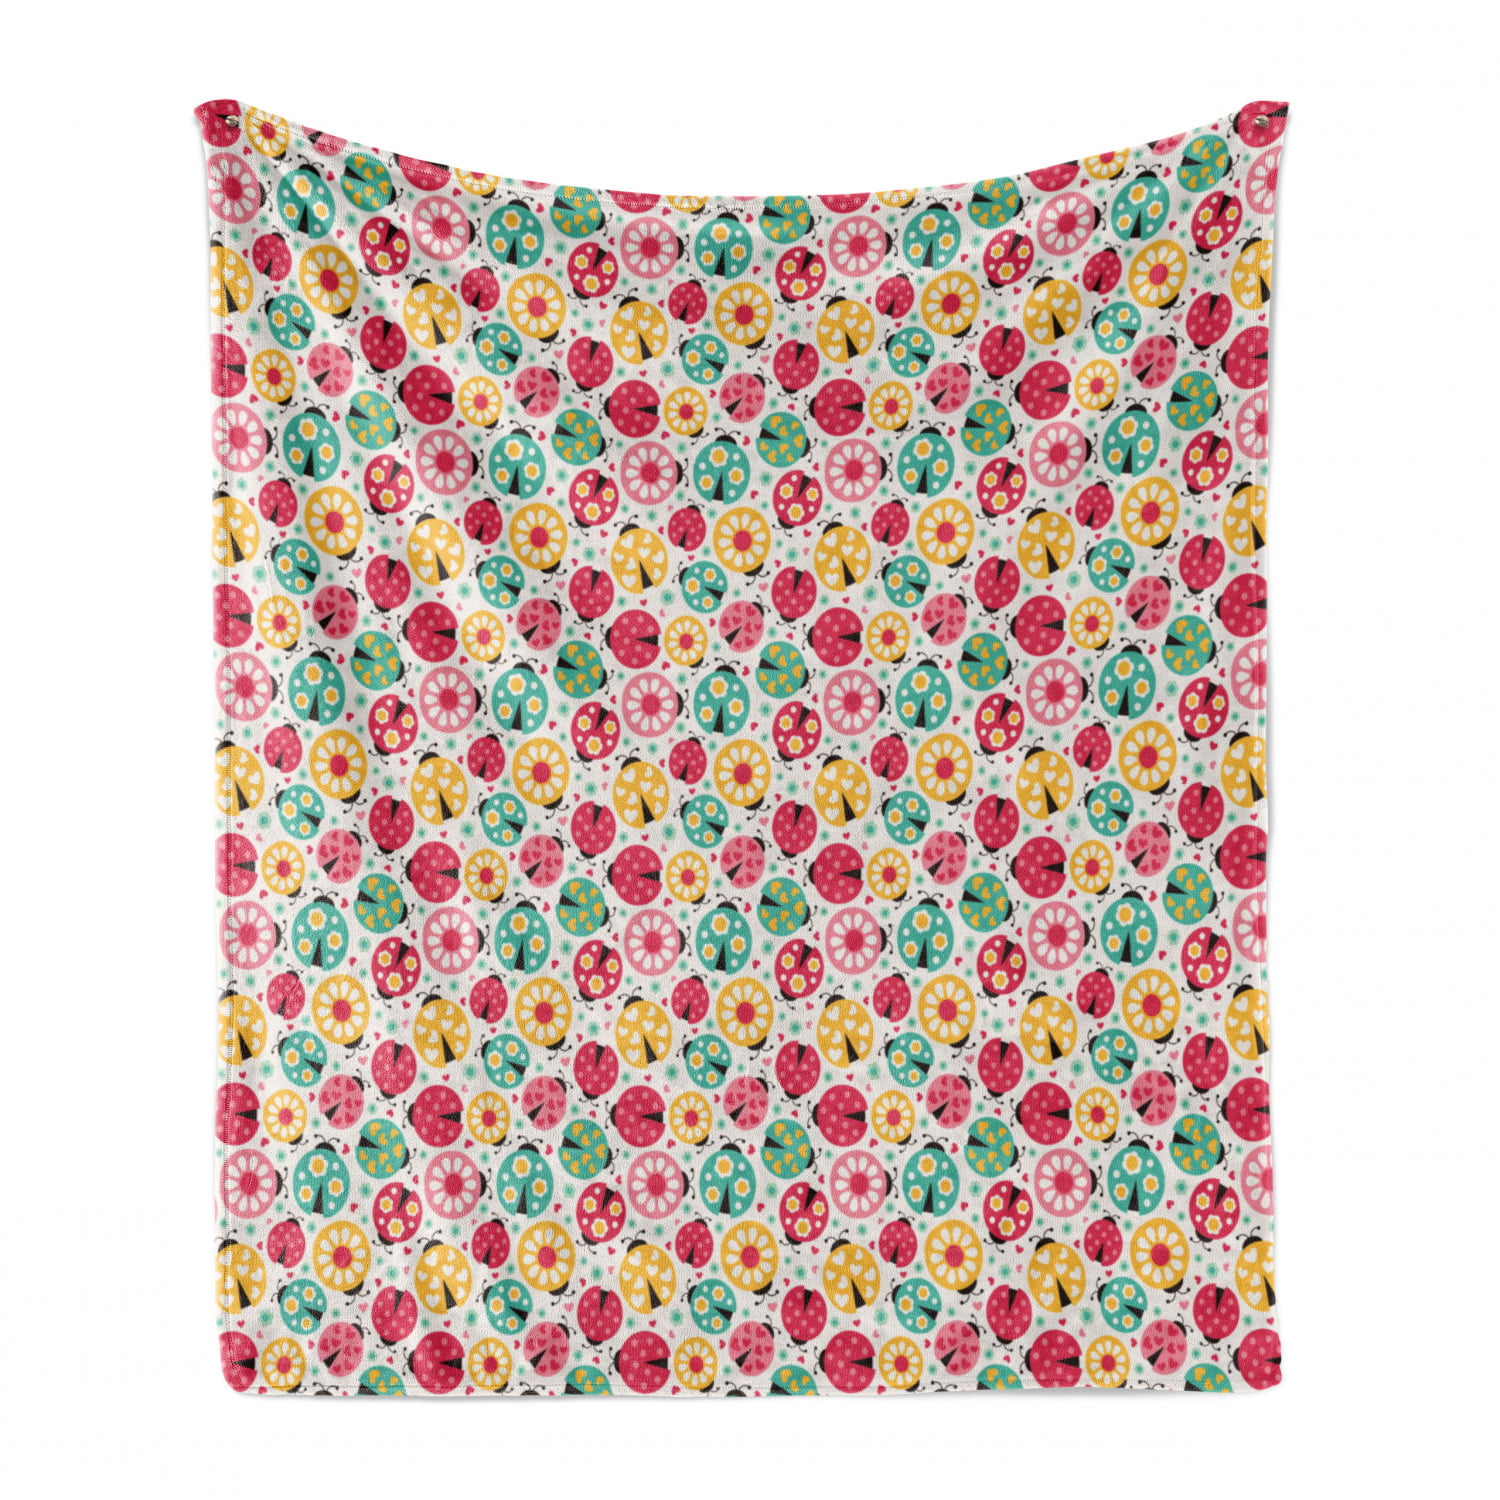 50 x 70 Cozy Plush for Indoor and Outdoor Use Multicolor Abstract Bug Pattern with Many Different Designs Hearts Polka Dots Daisies Nature Ambesonne Ladybugs Soft Flannel Fleece Throw Blanket 